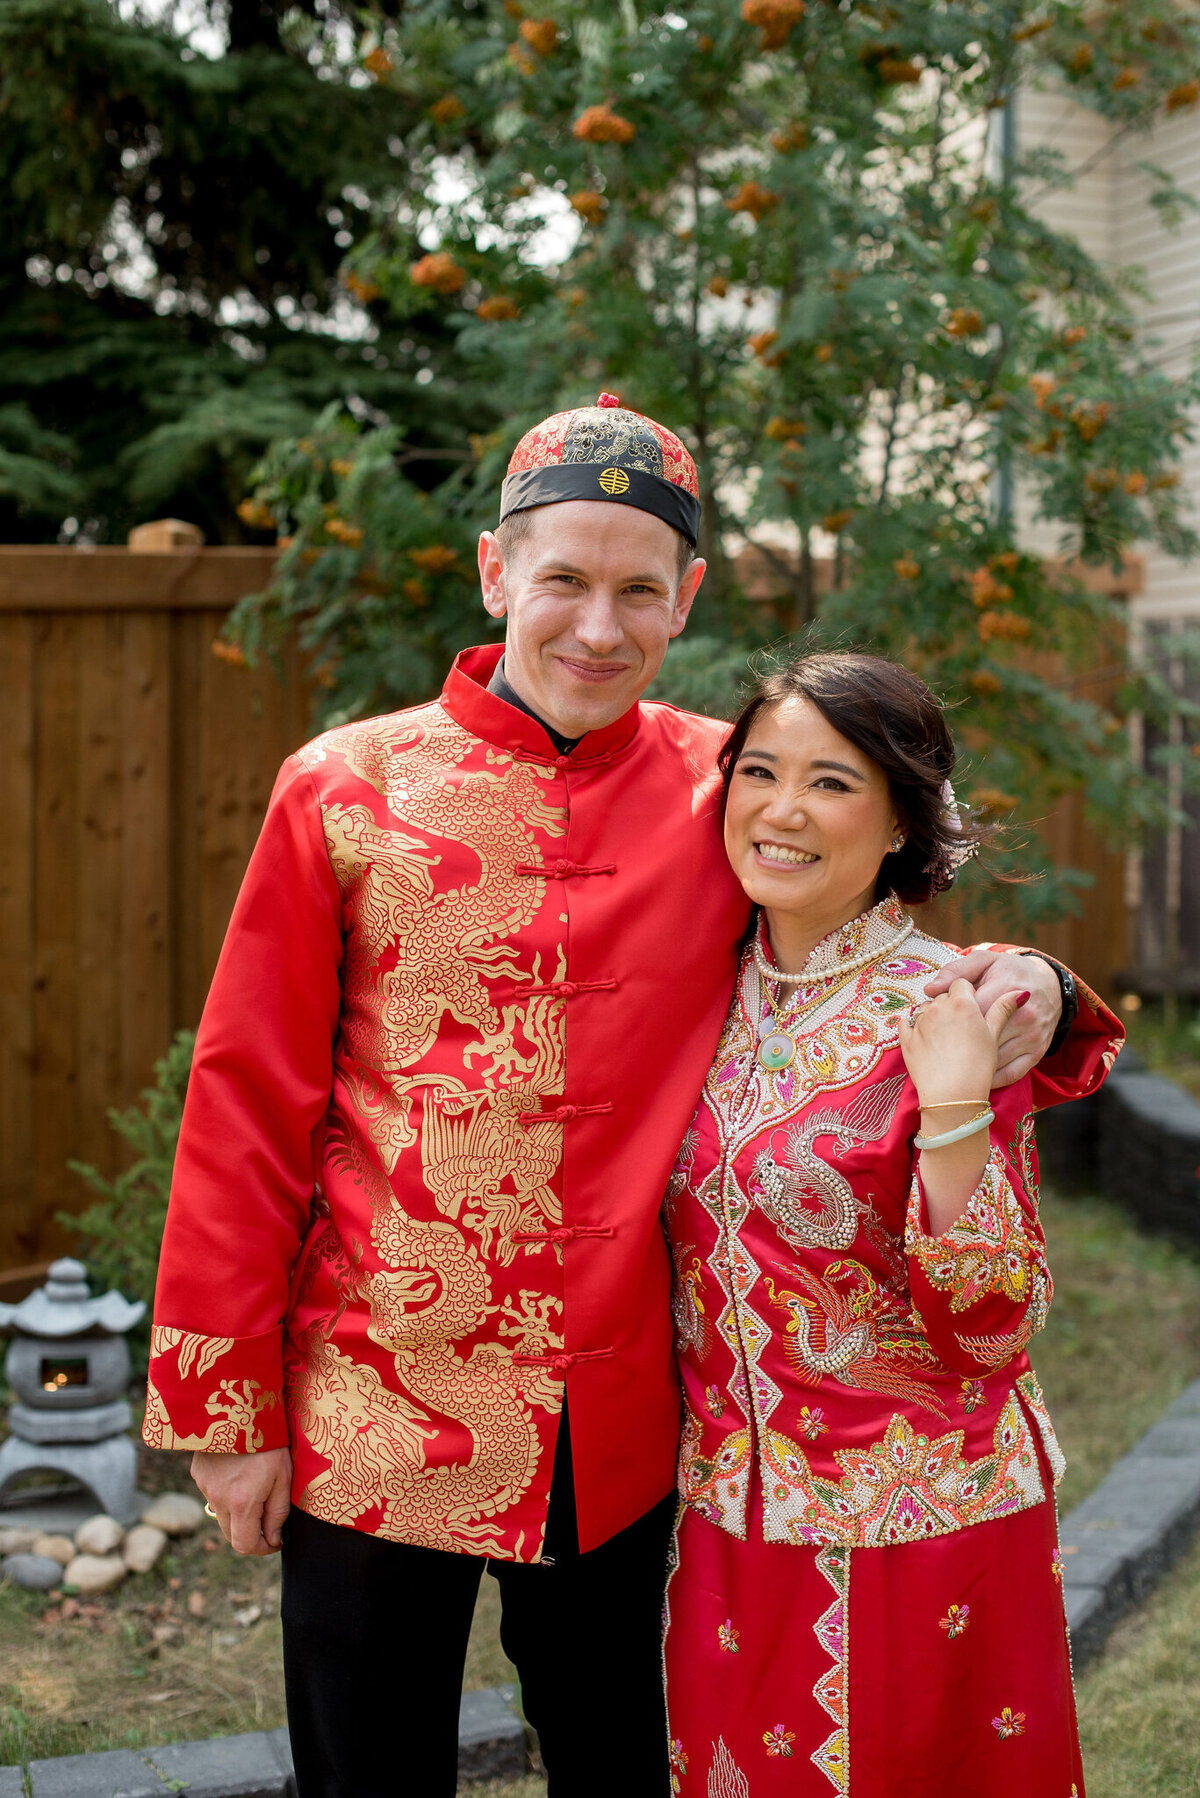 Multicultural wedding inspiration, couple in traditional Chinese wedding dress red and gold Qun Kwa at their Chinese Tea Ceremony, captured by Janelle Dudzic Photography, colourful and candid wedding photographer in Edmonton, Alberta. Featured on the Bronte Bride Vendor Guide.